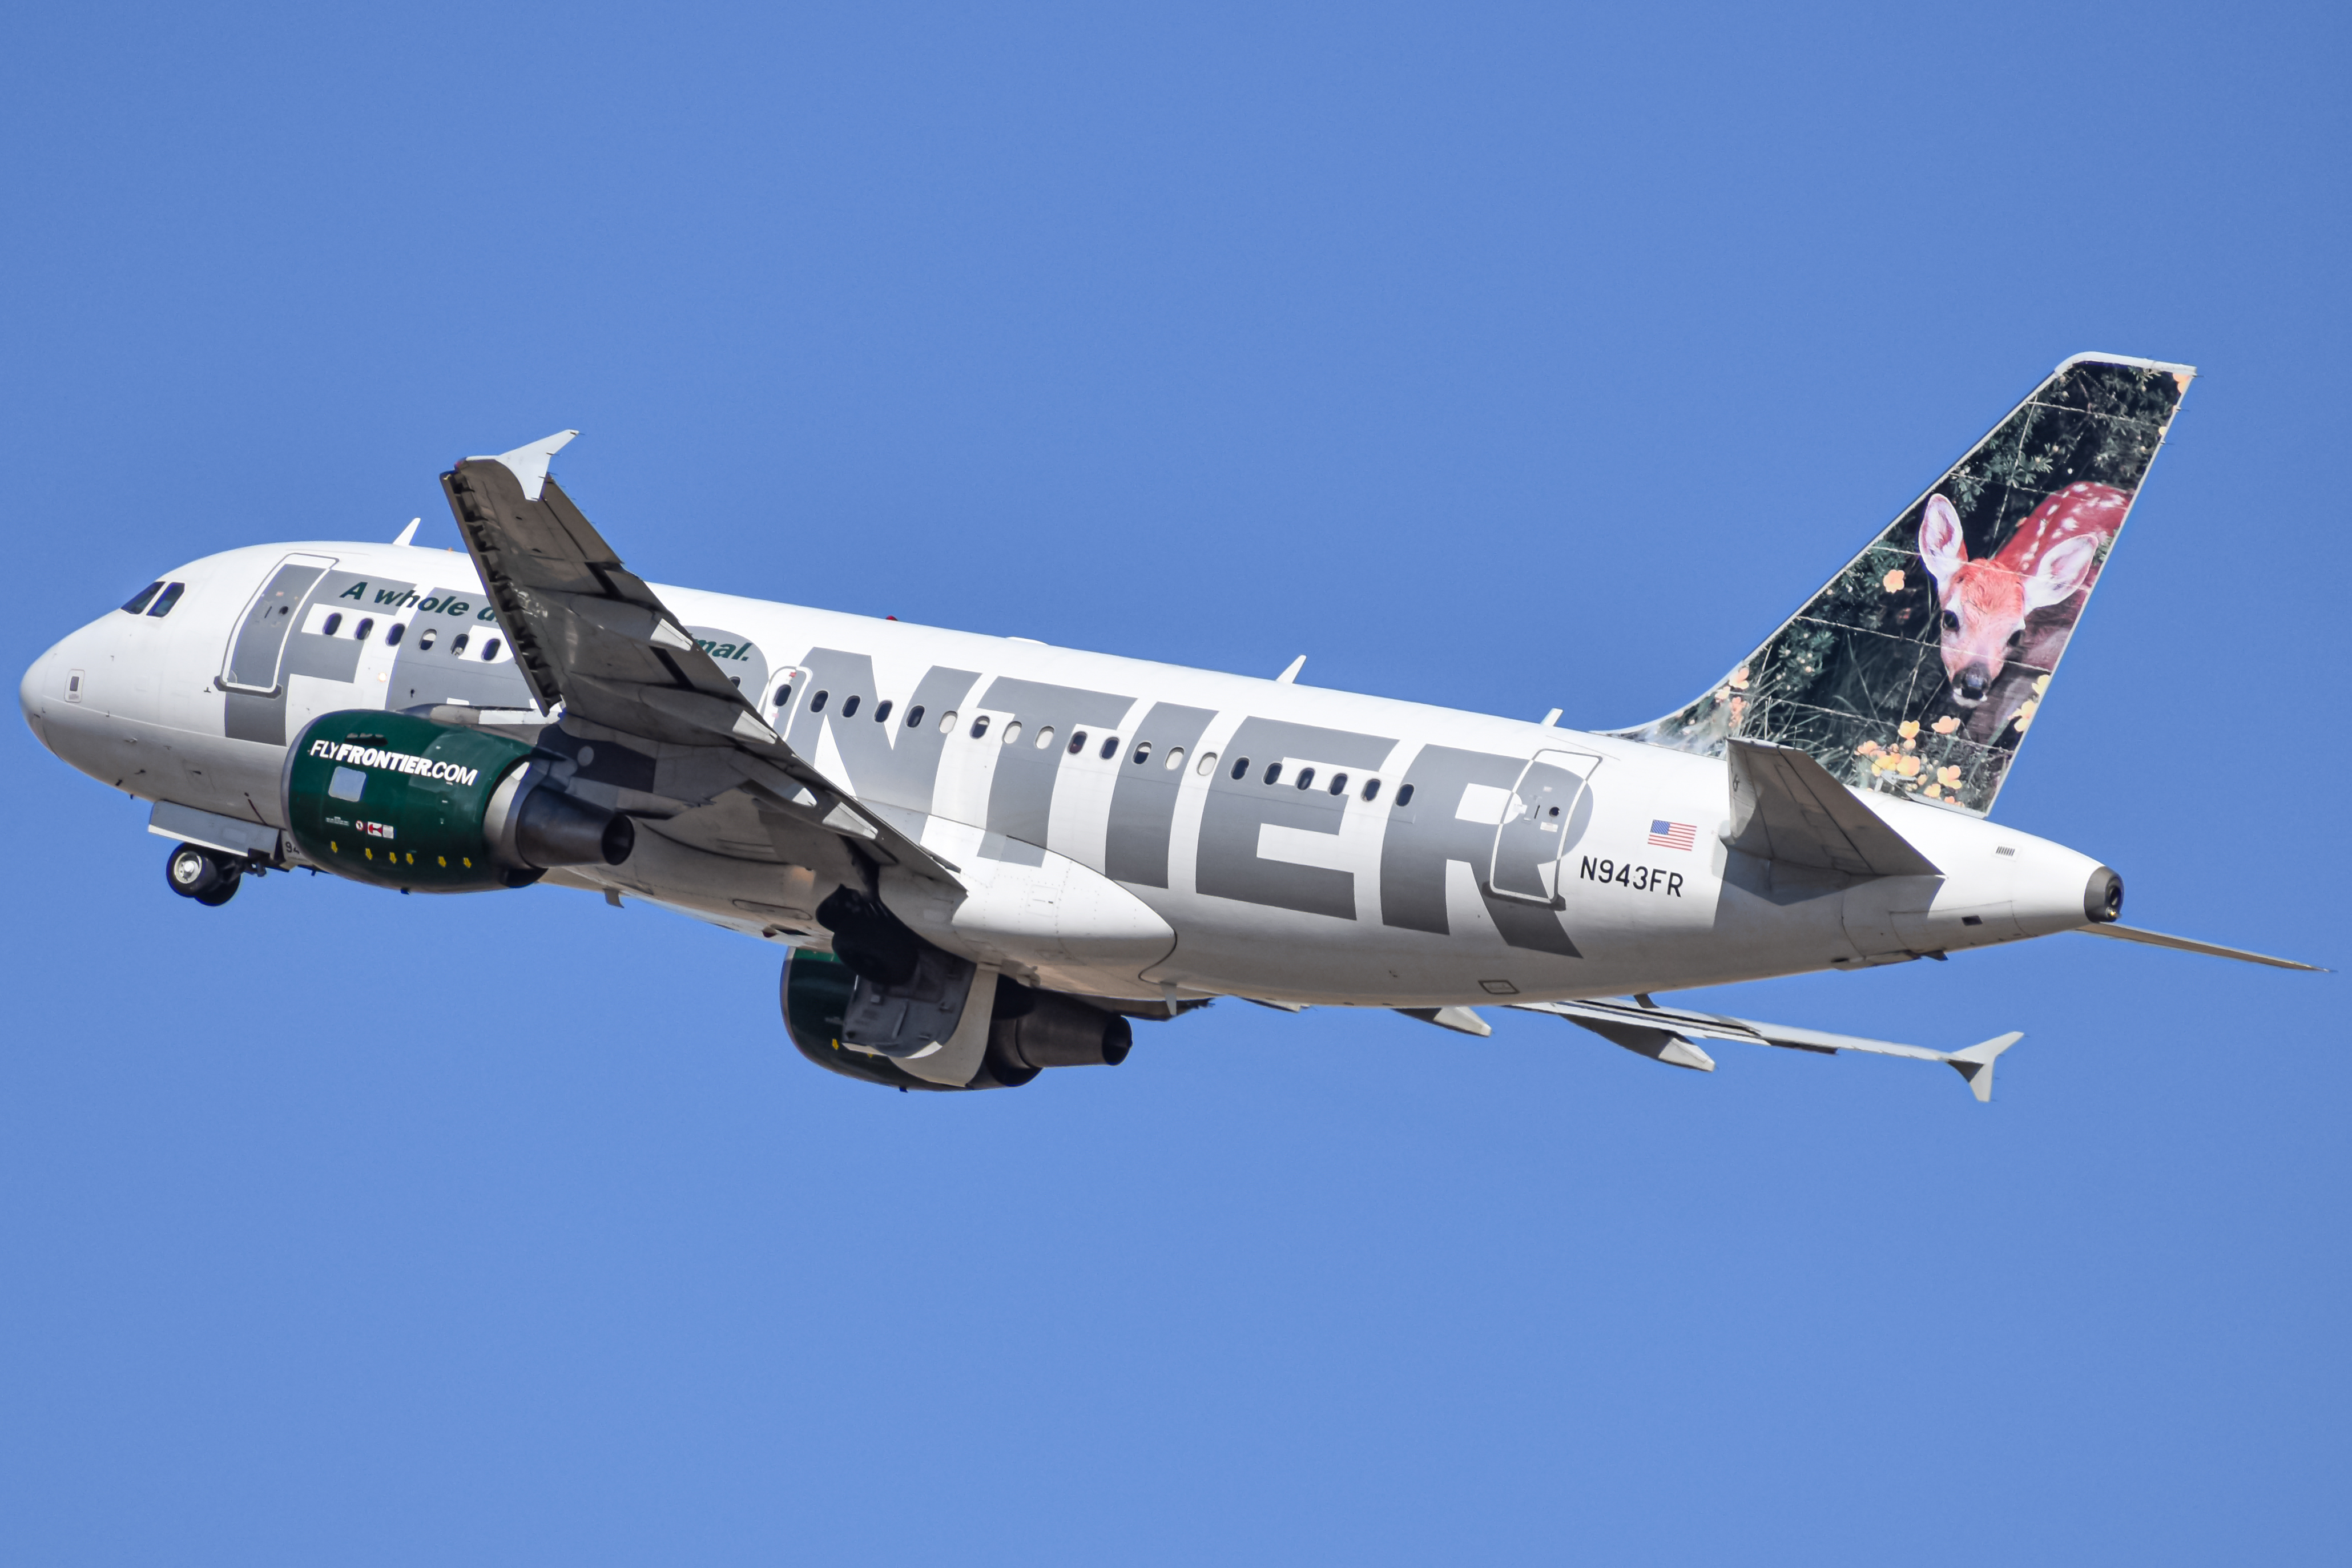 Photo of N943FR - Frontier Airlines Airbus A319 at DEN